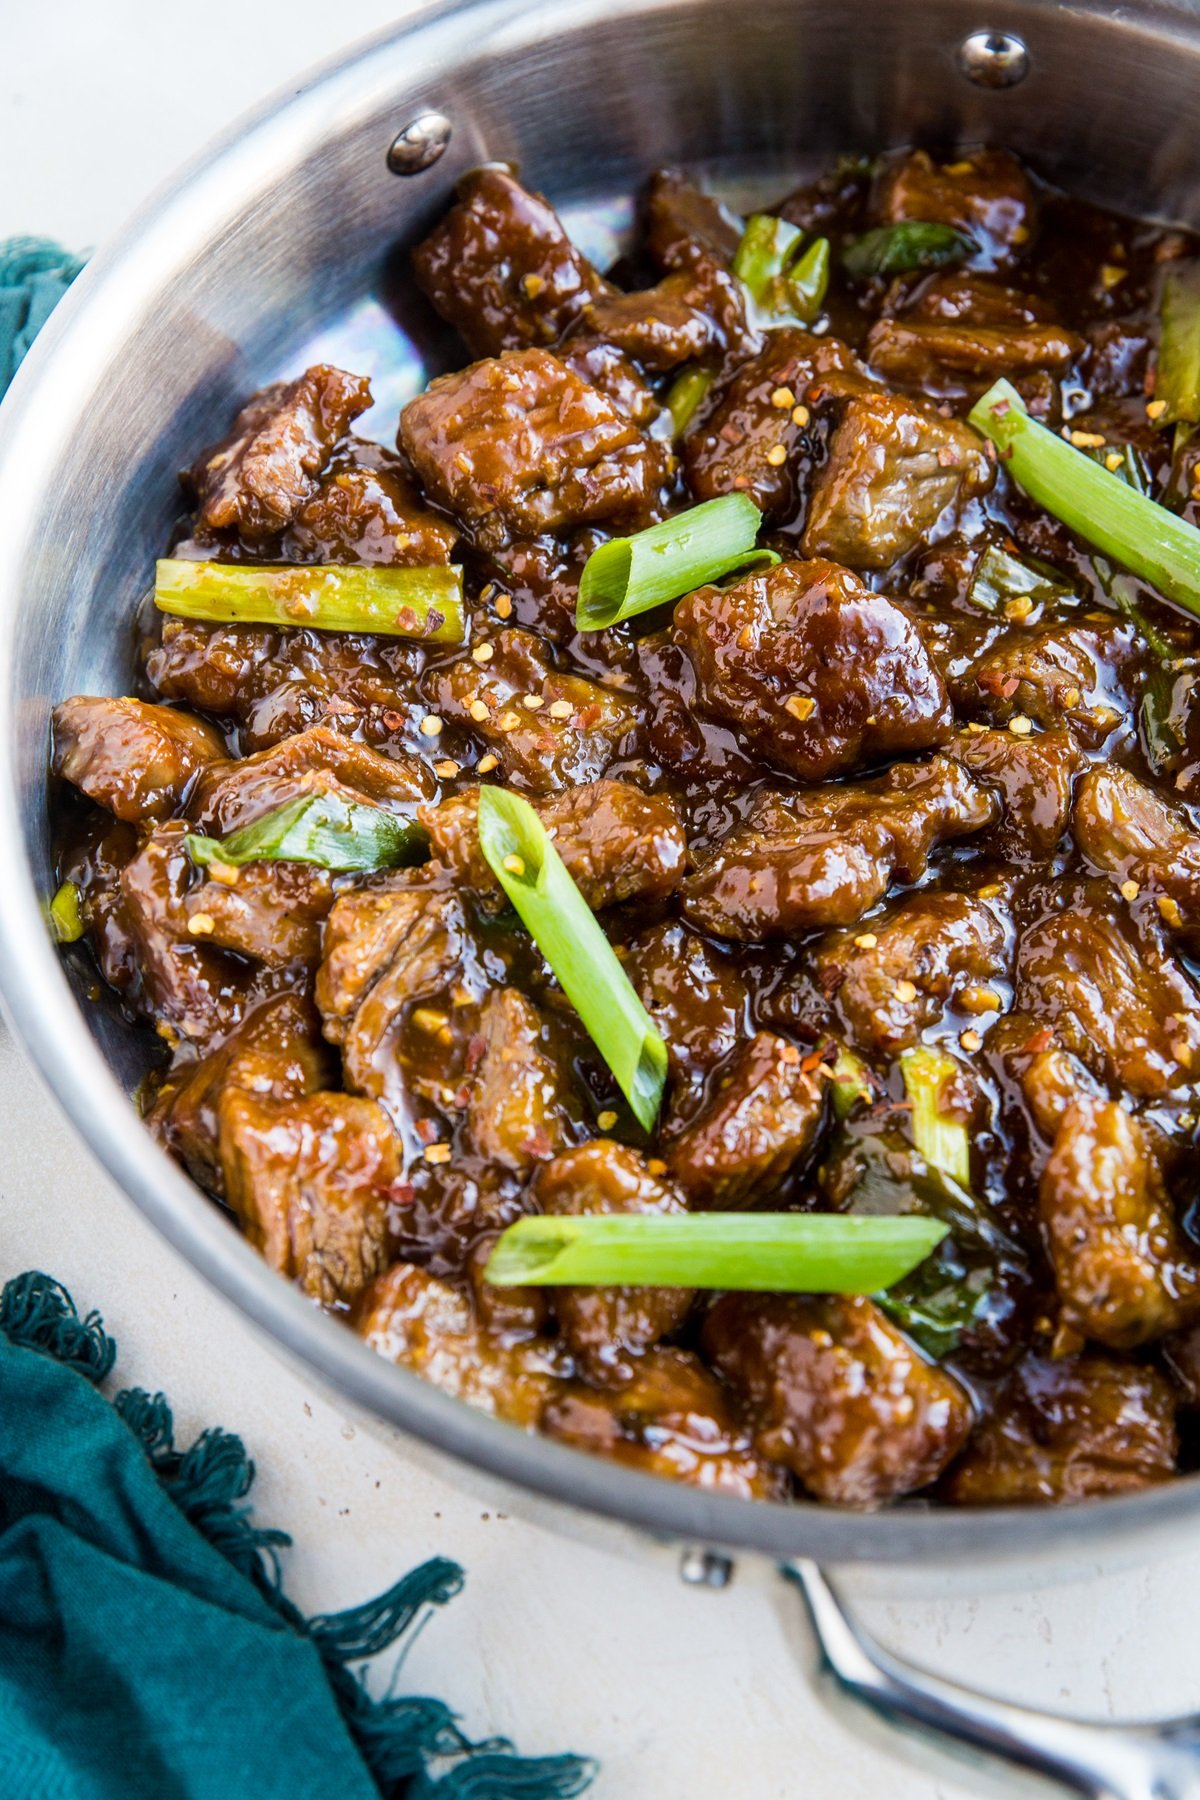 Quick and Easy Paleo Mongolian Beef ready in 30 minutes! Easy, soy-free, grain-free, refined sugar-free better than takeout